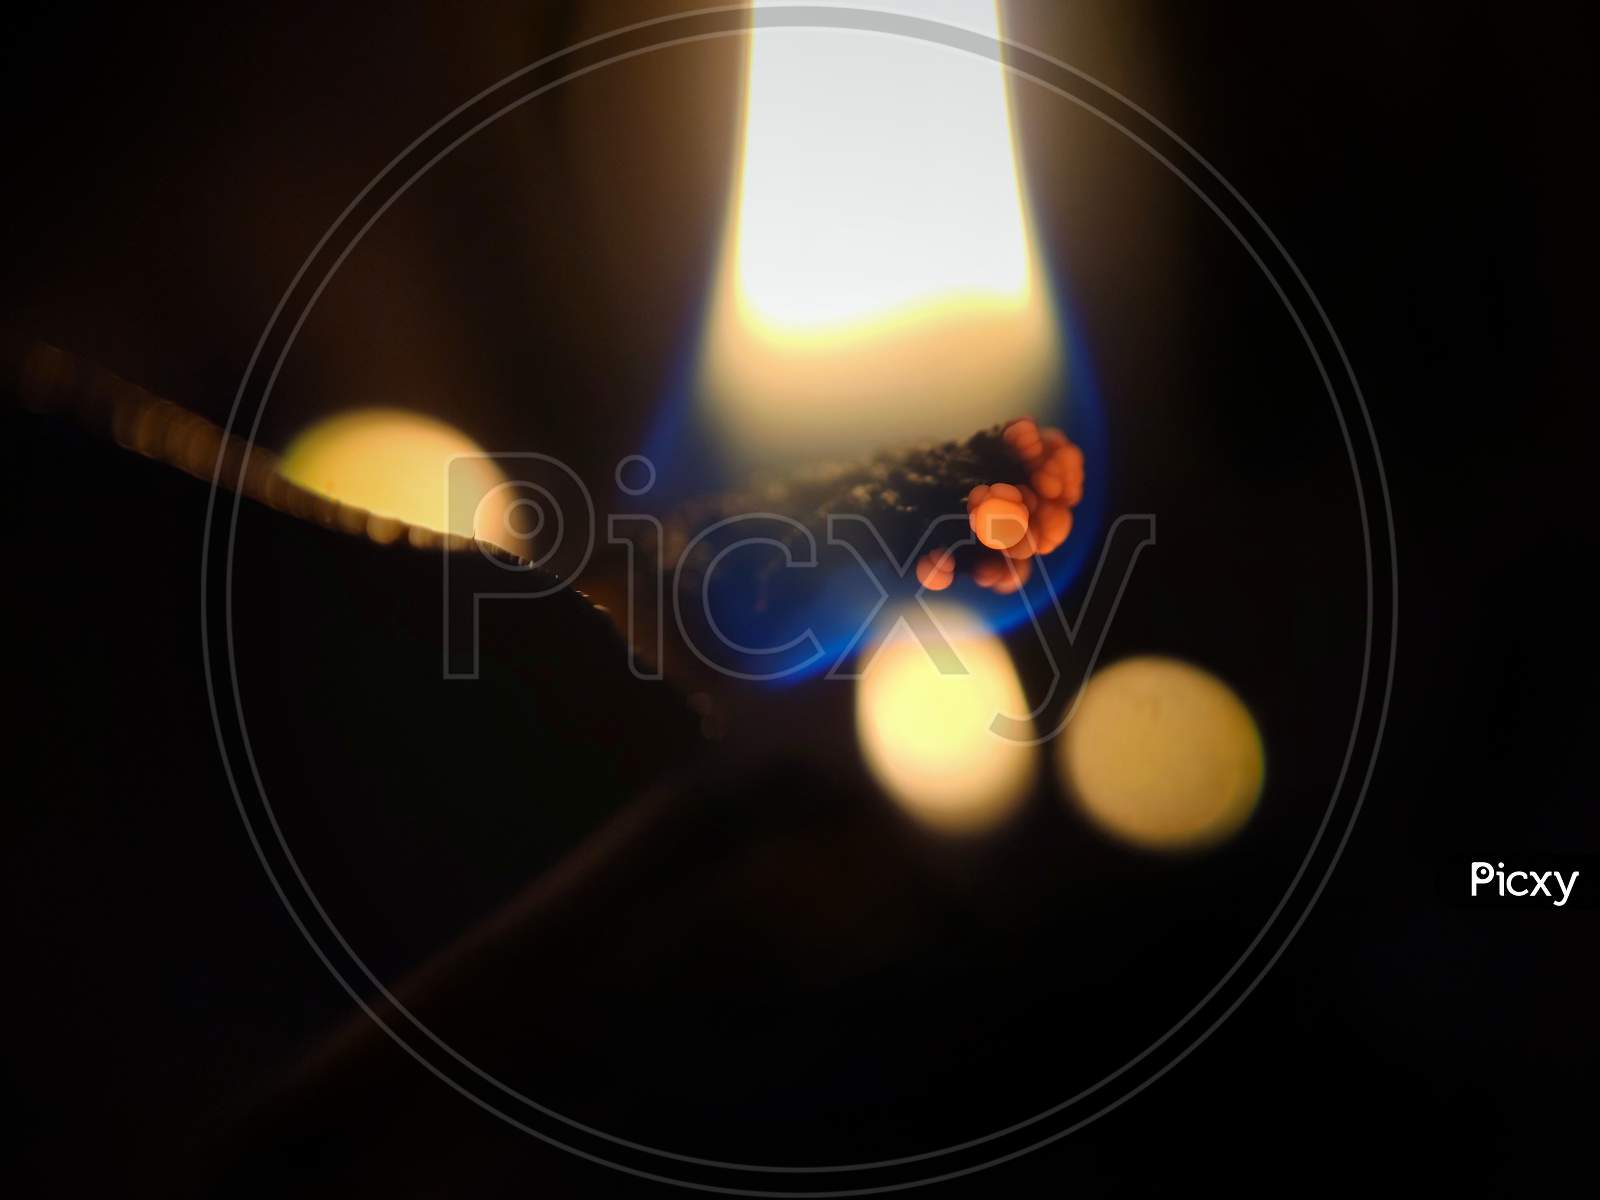 this is a picture of burning oil lamp in dark.